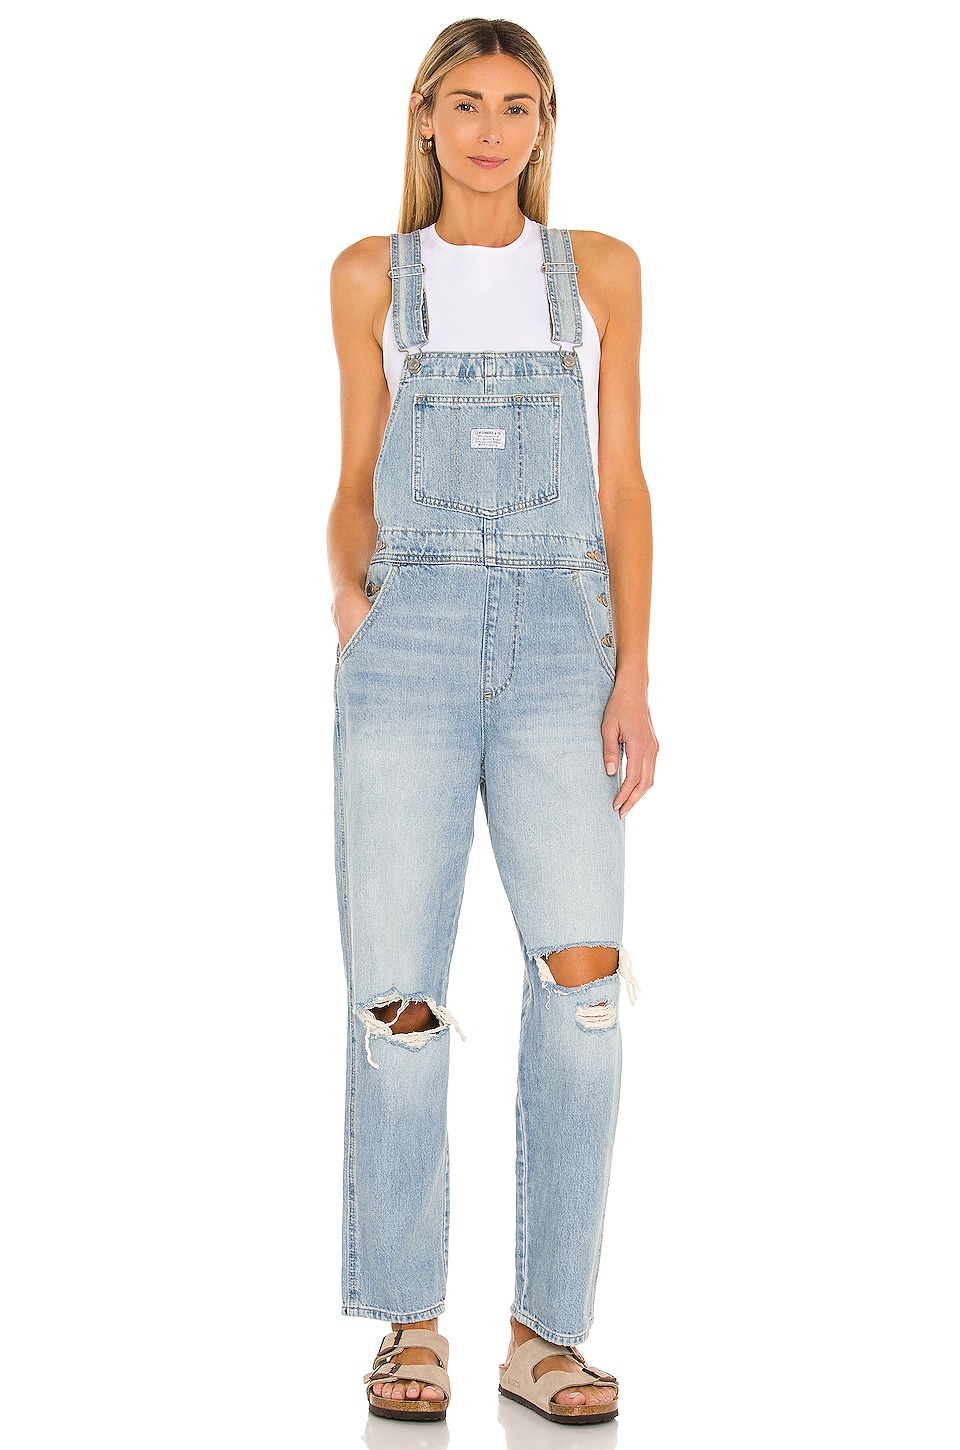 LEVI'S Vintage Overall in Bright Light | REVOLVE